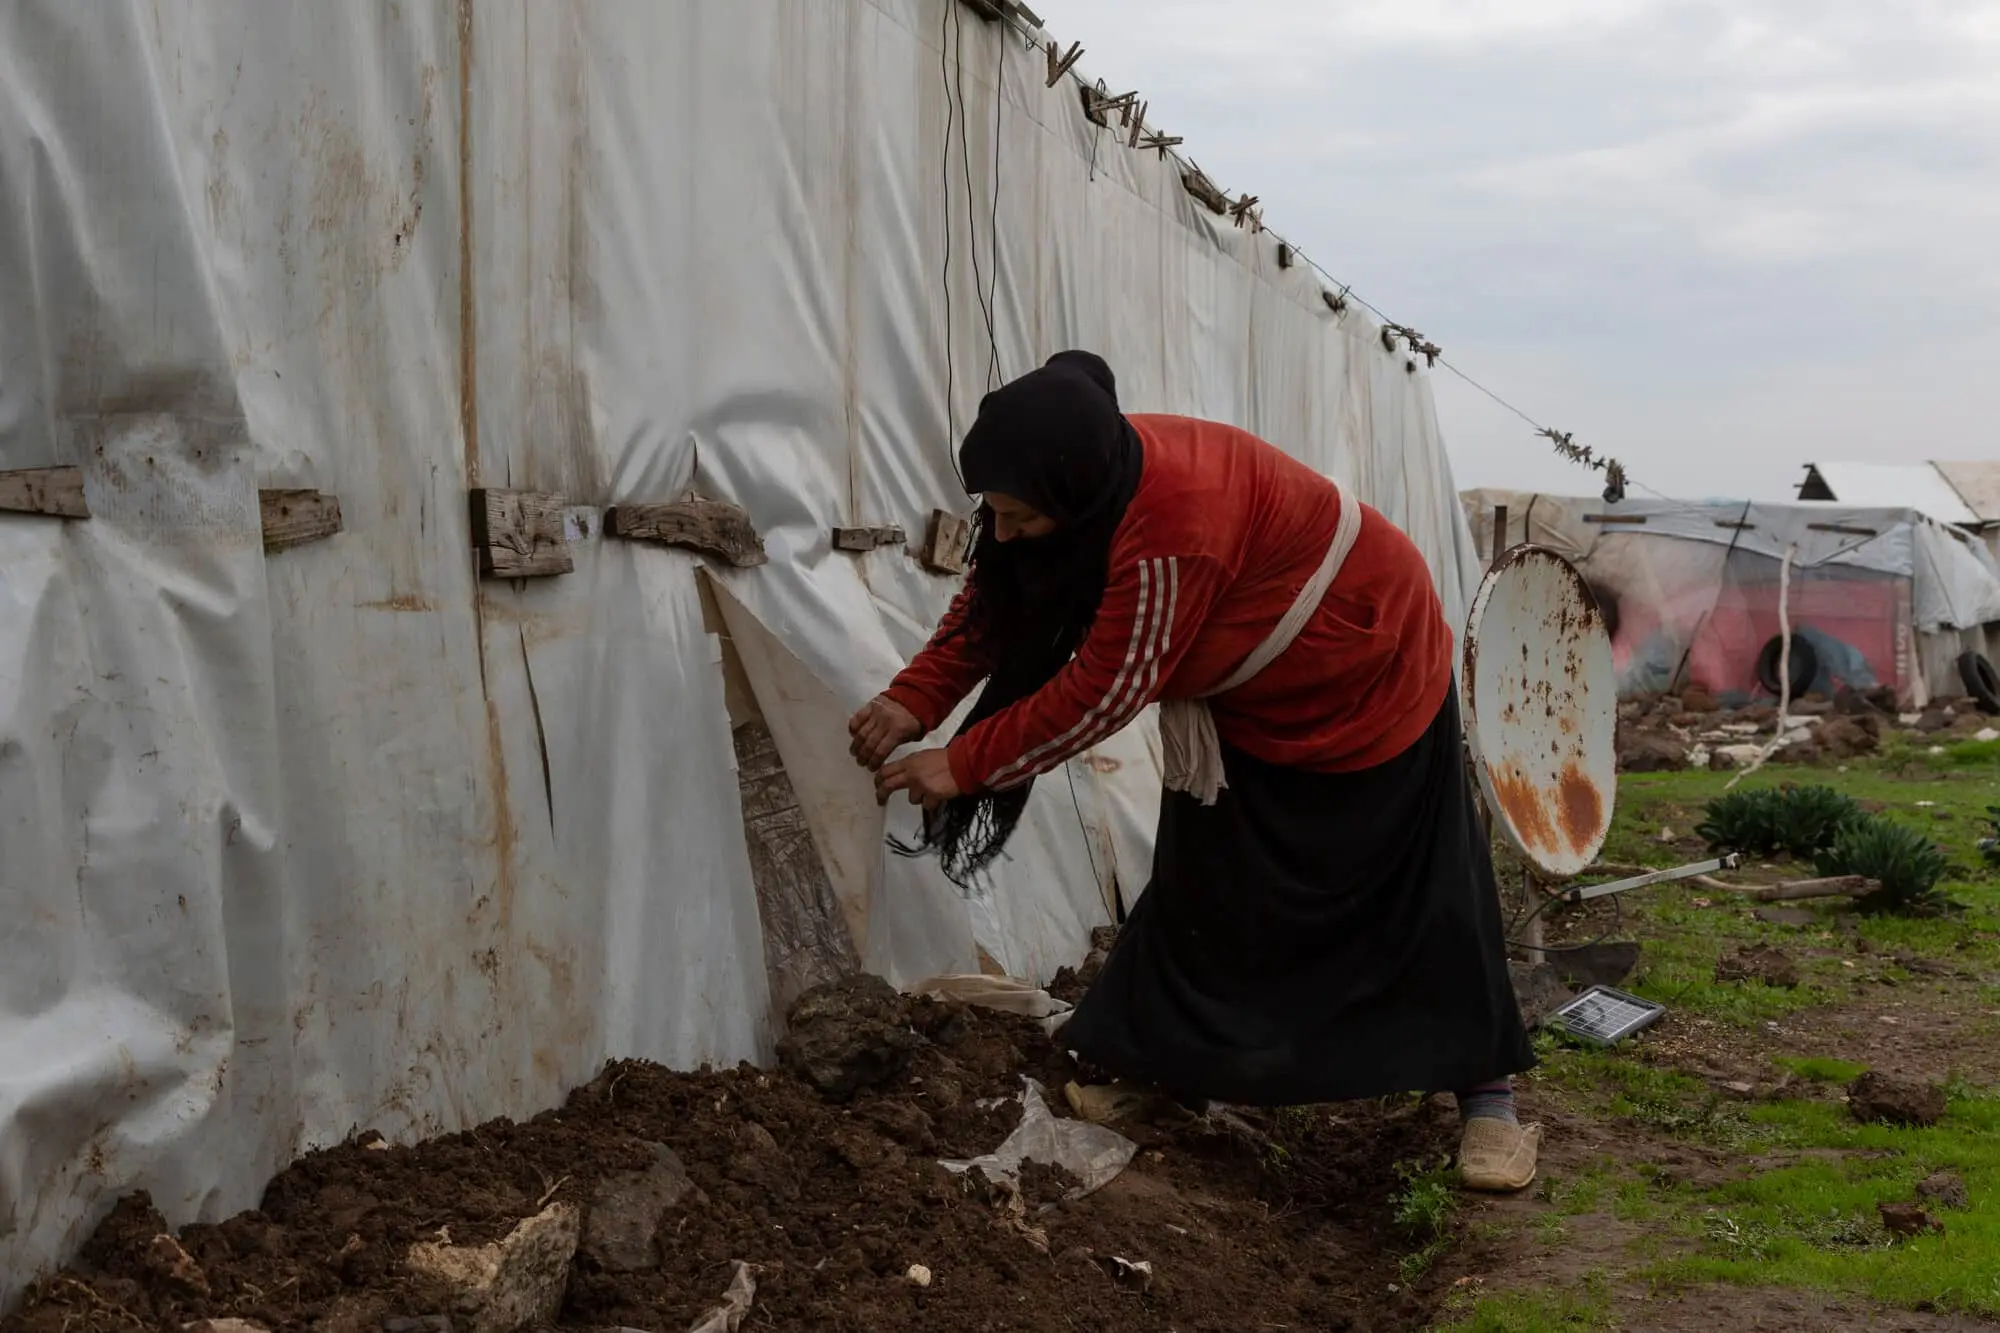 A Syrian refugee woman shows the torn plastic covers of her tent in the village of Shir Hmyrin, in Akkar.